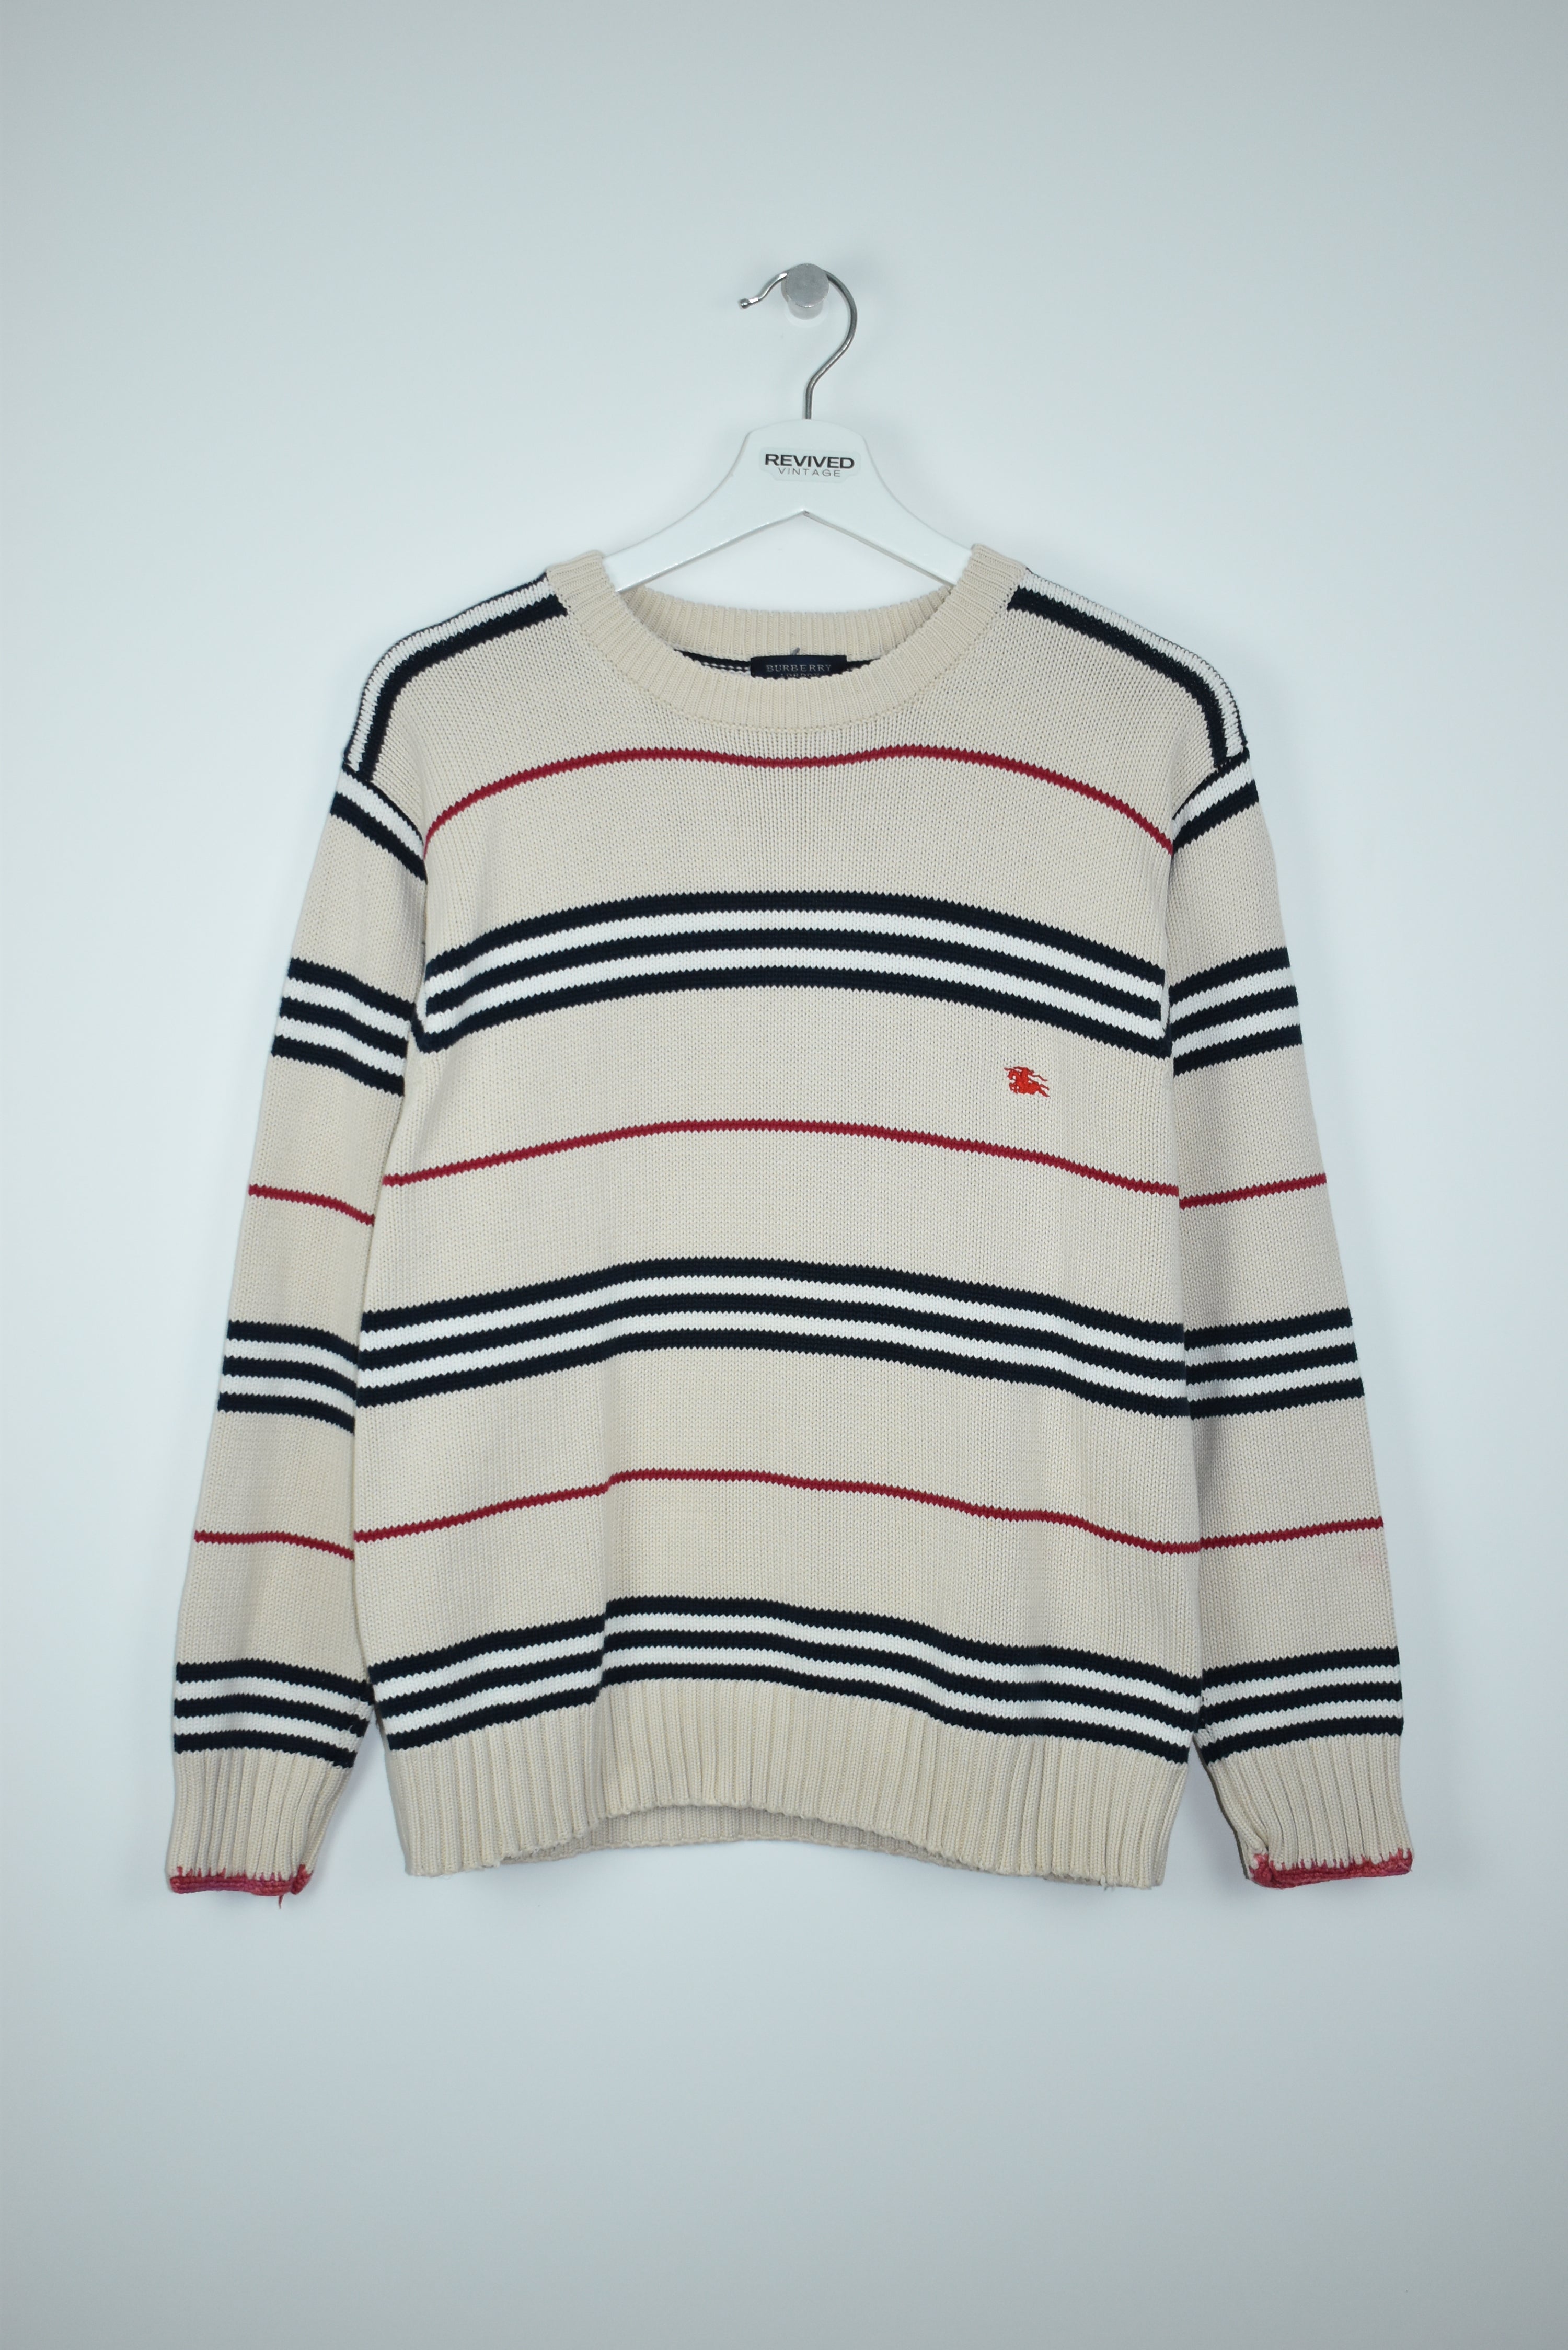 Vintage Burberry Thick Knit Sweater Small